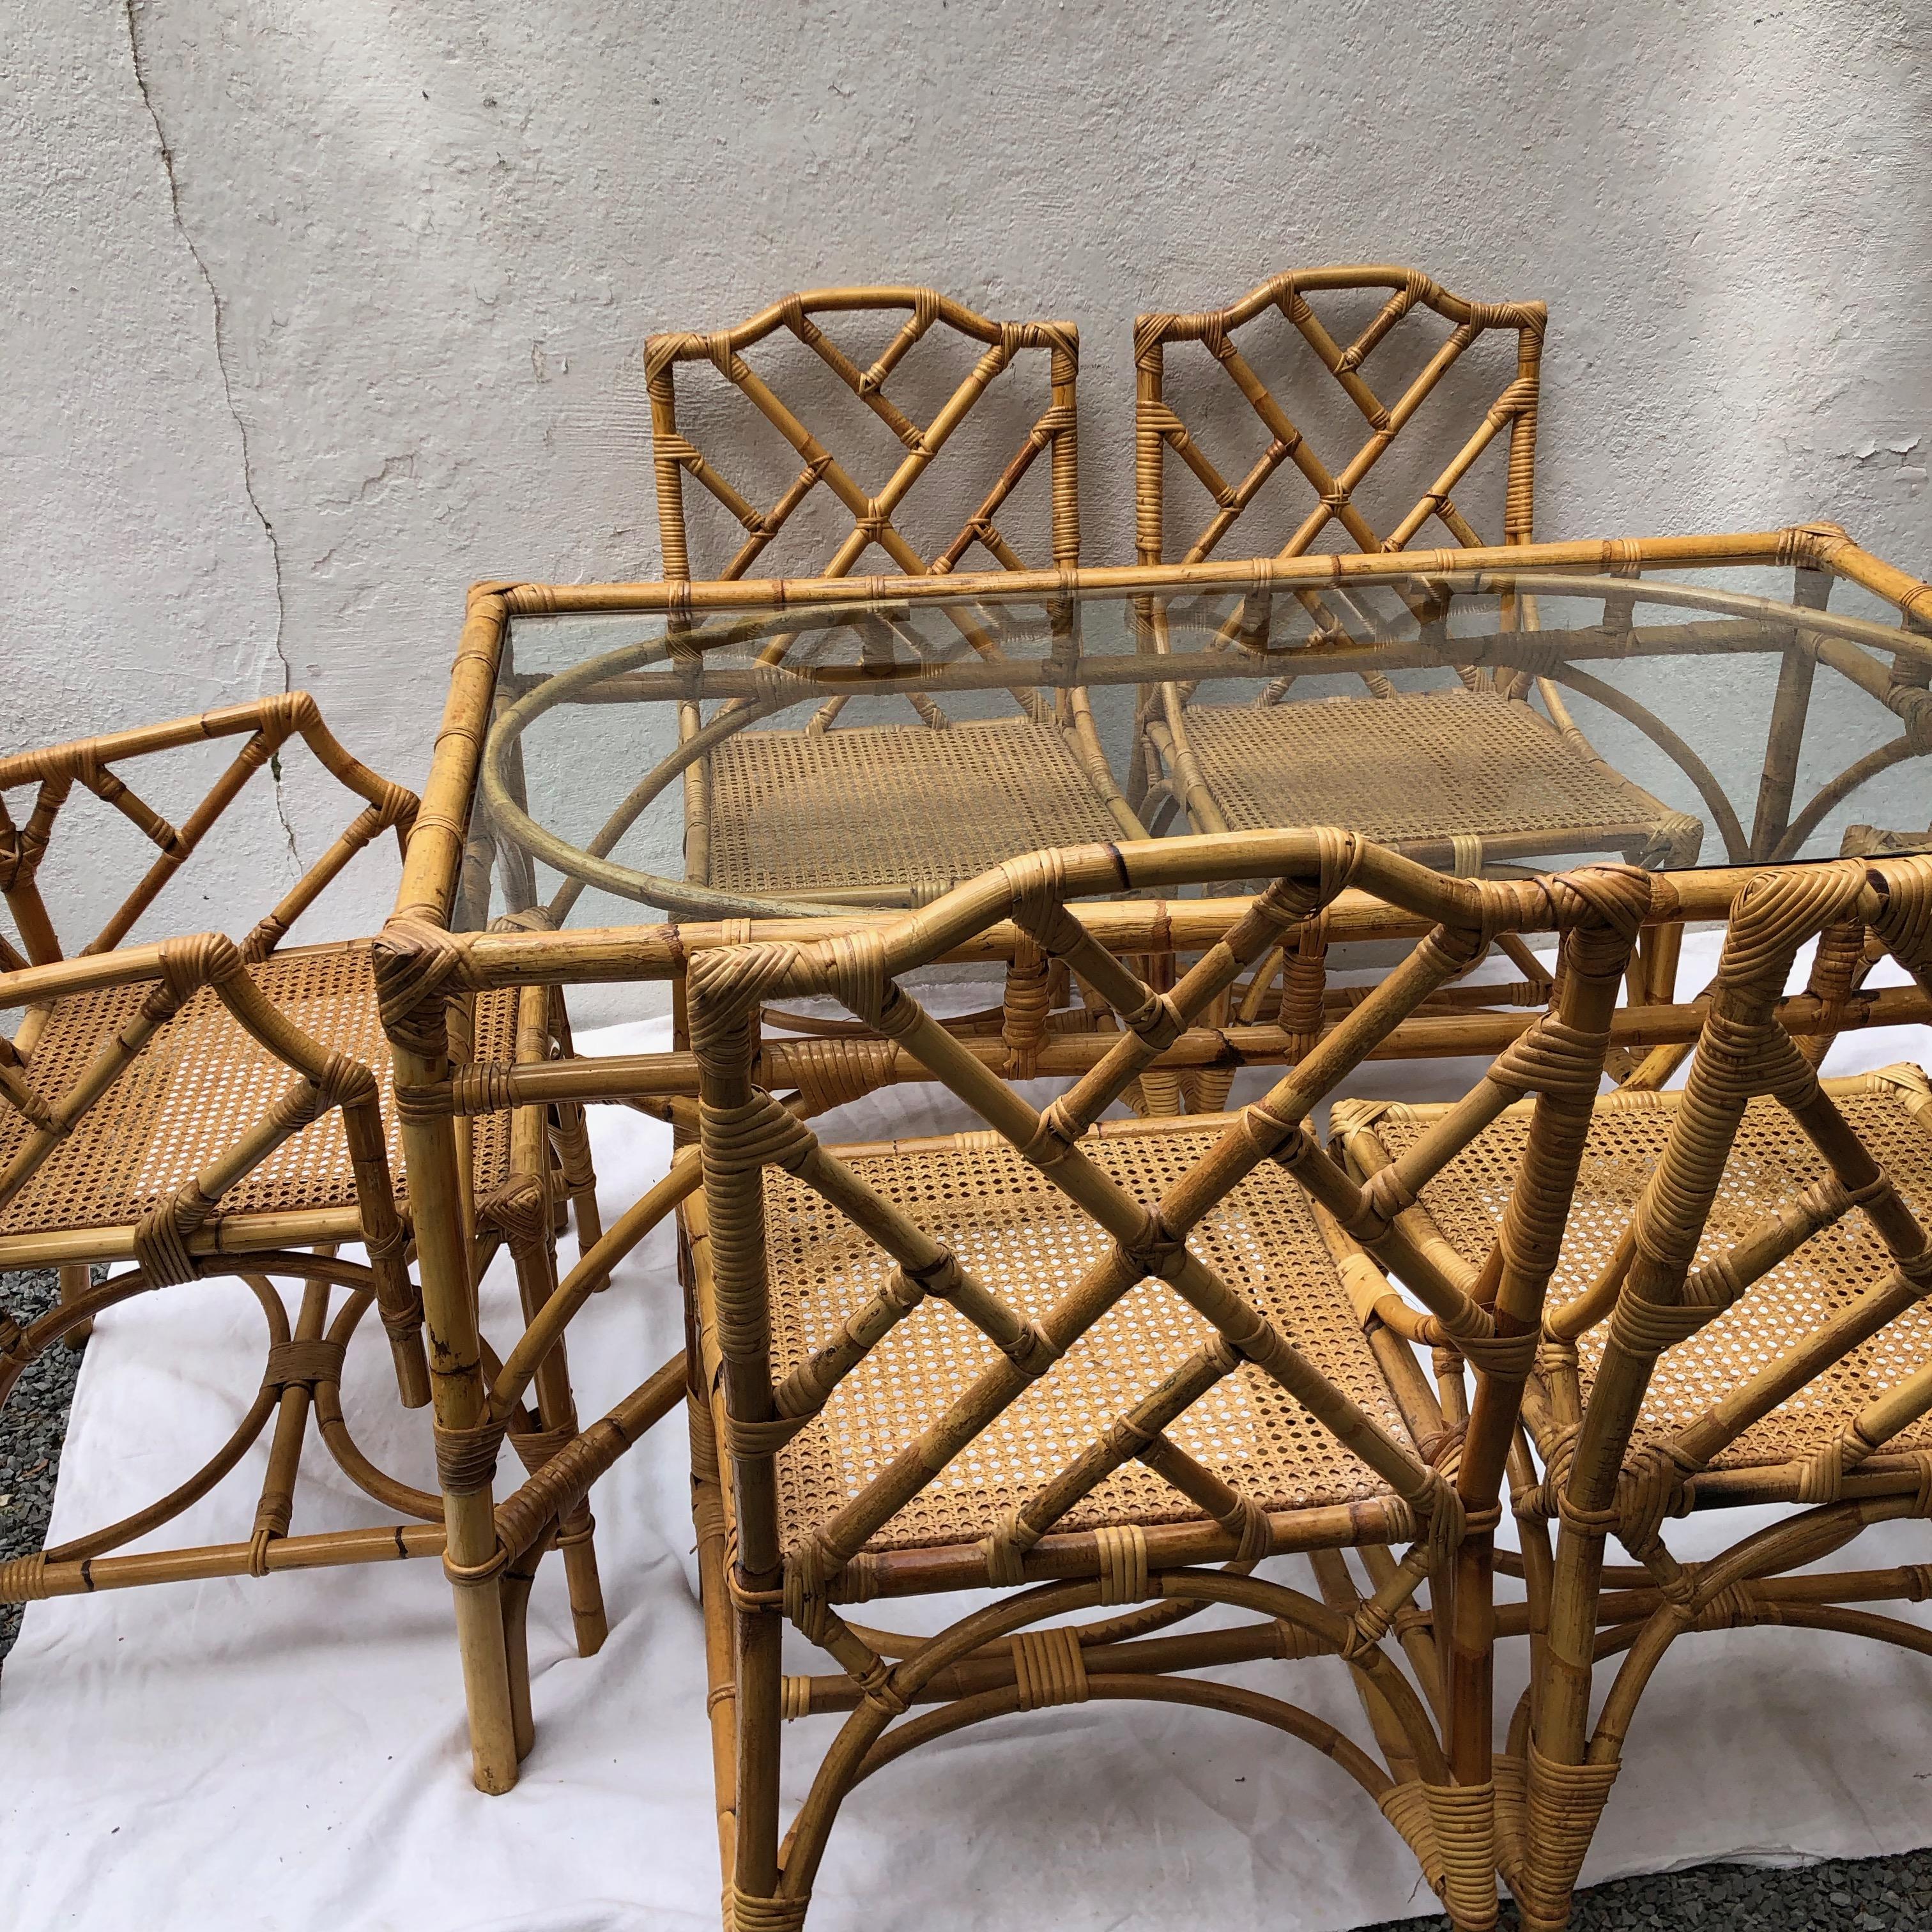 Chinese Chippendale style / Italian rattan and cane dining set by Dal Vera including dining table with glass top, two armchairs and four chairs in the style of Gabriella Crespi

Measures: Table 29